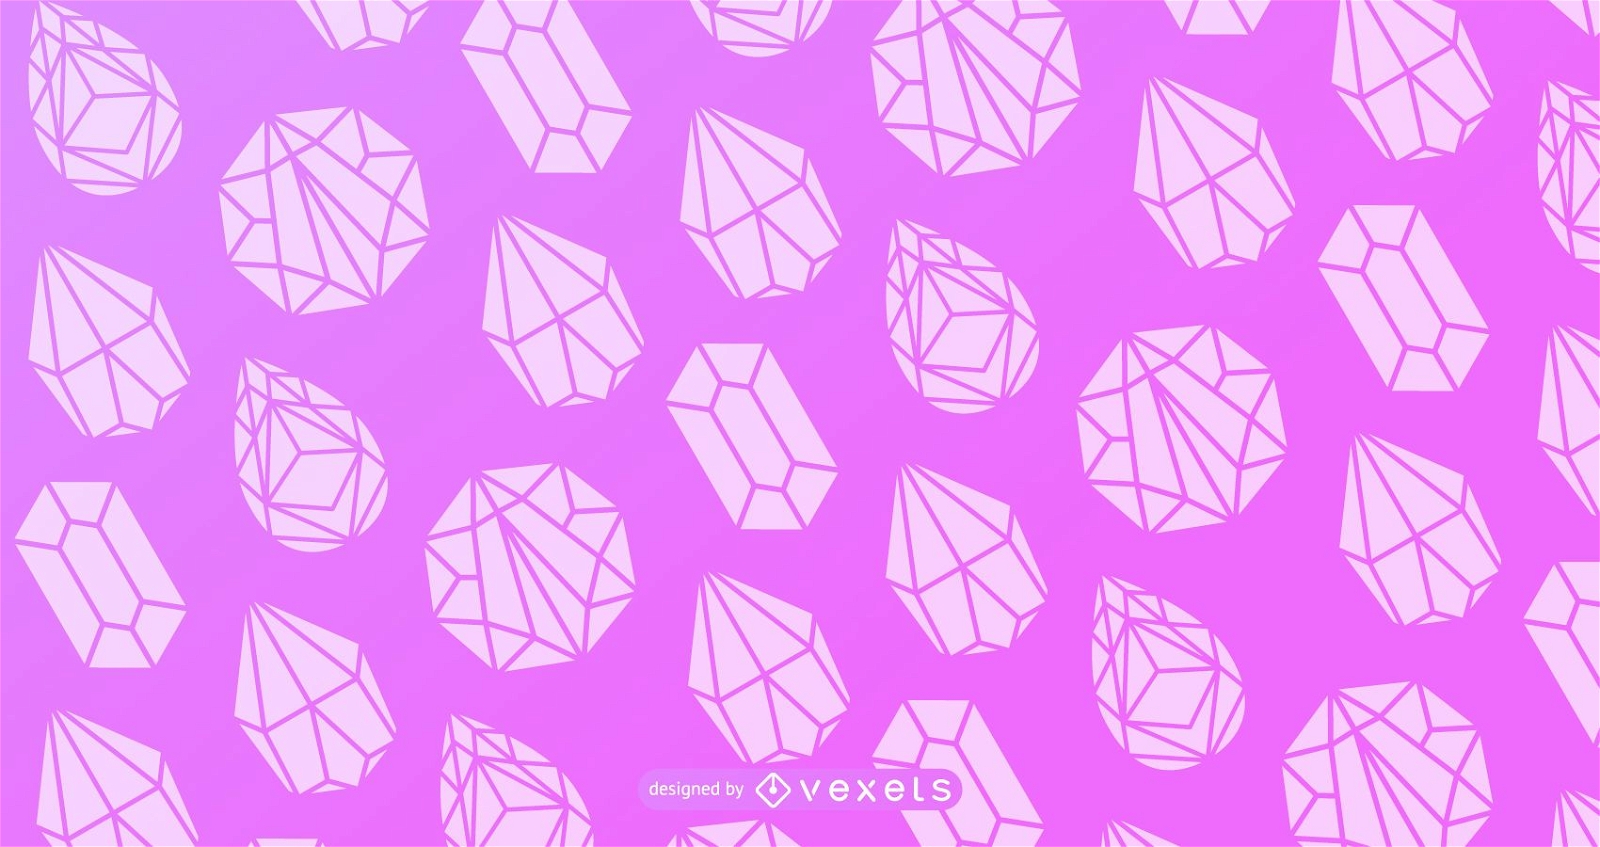 Crystal silhouette pattern design